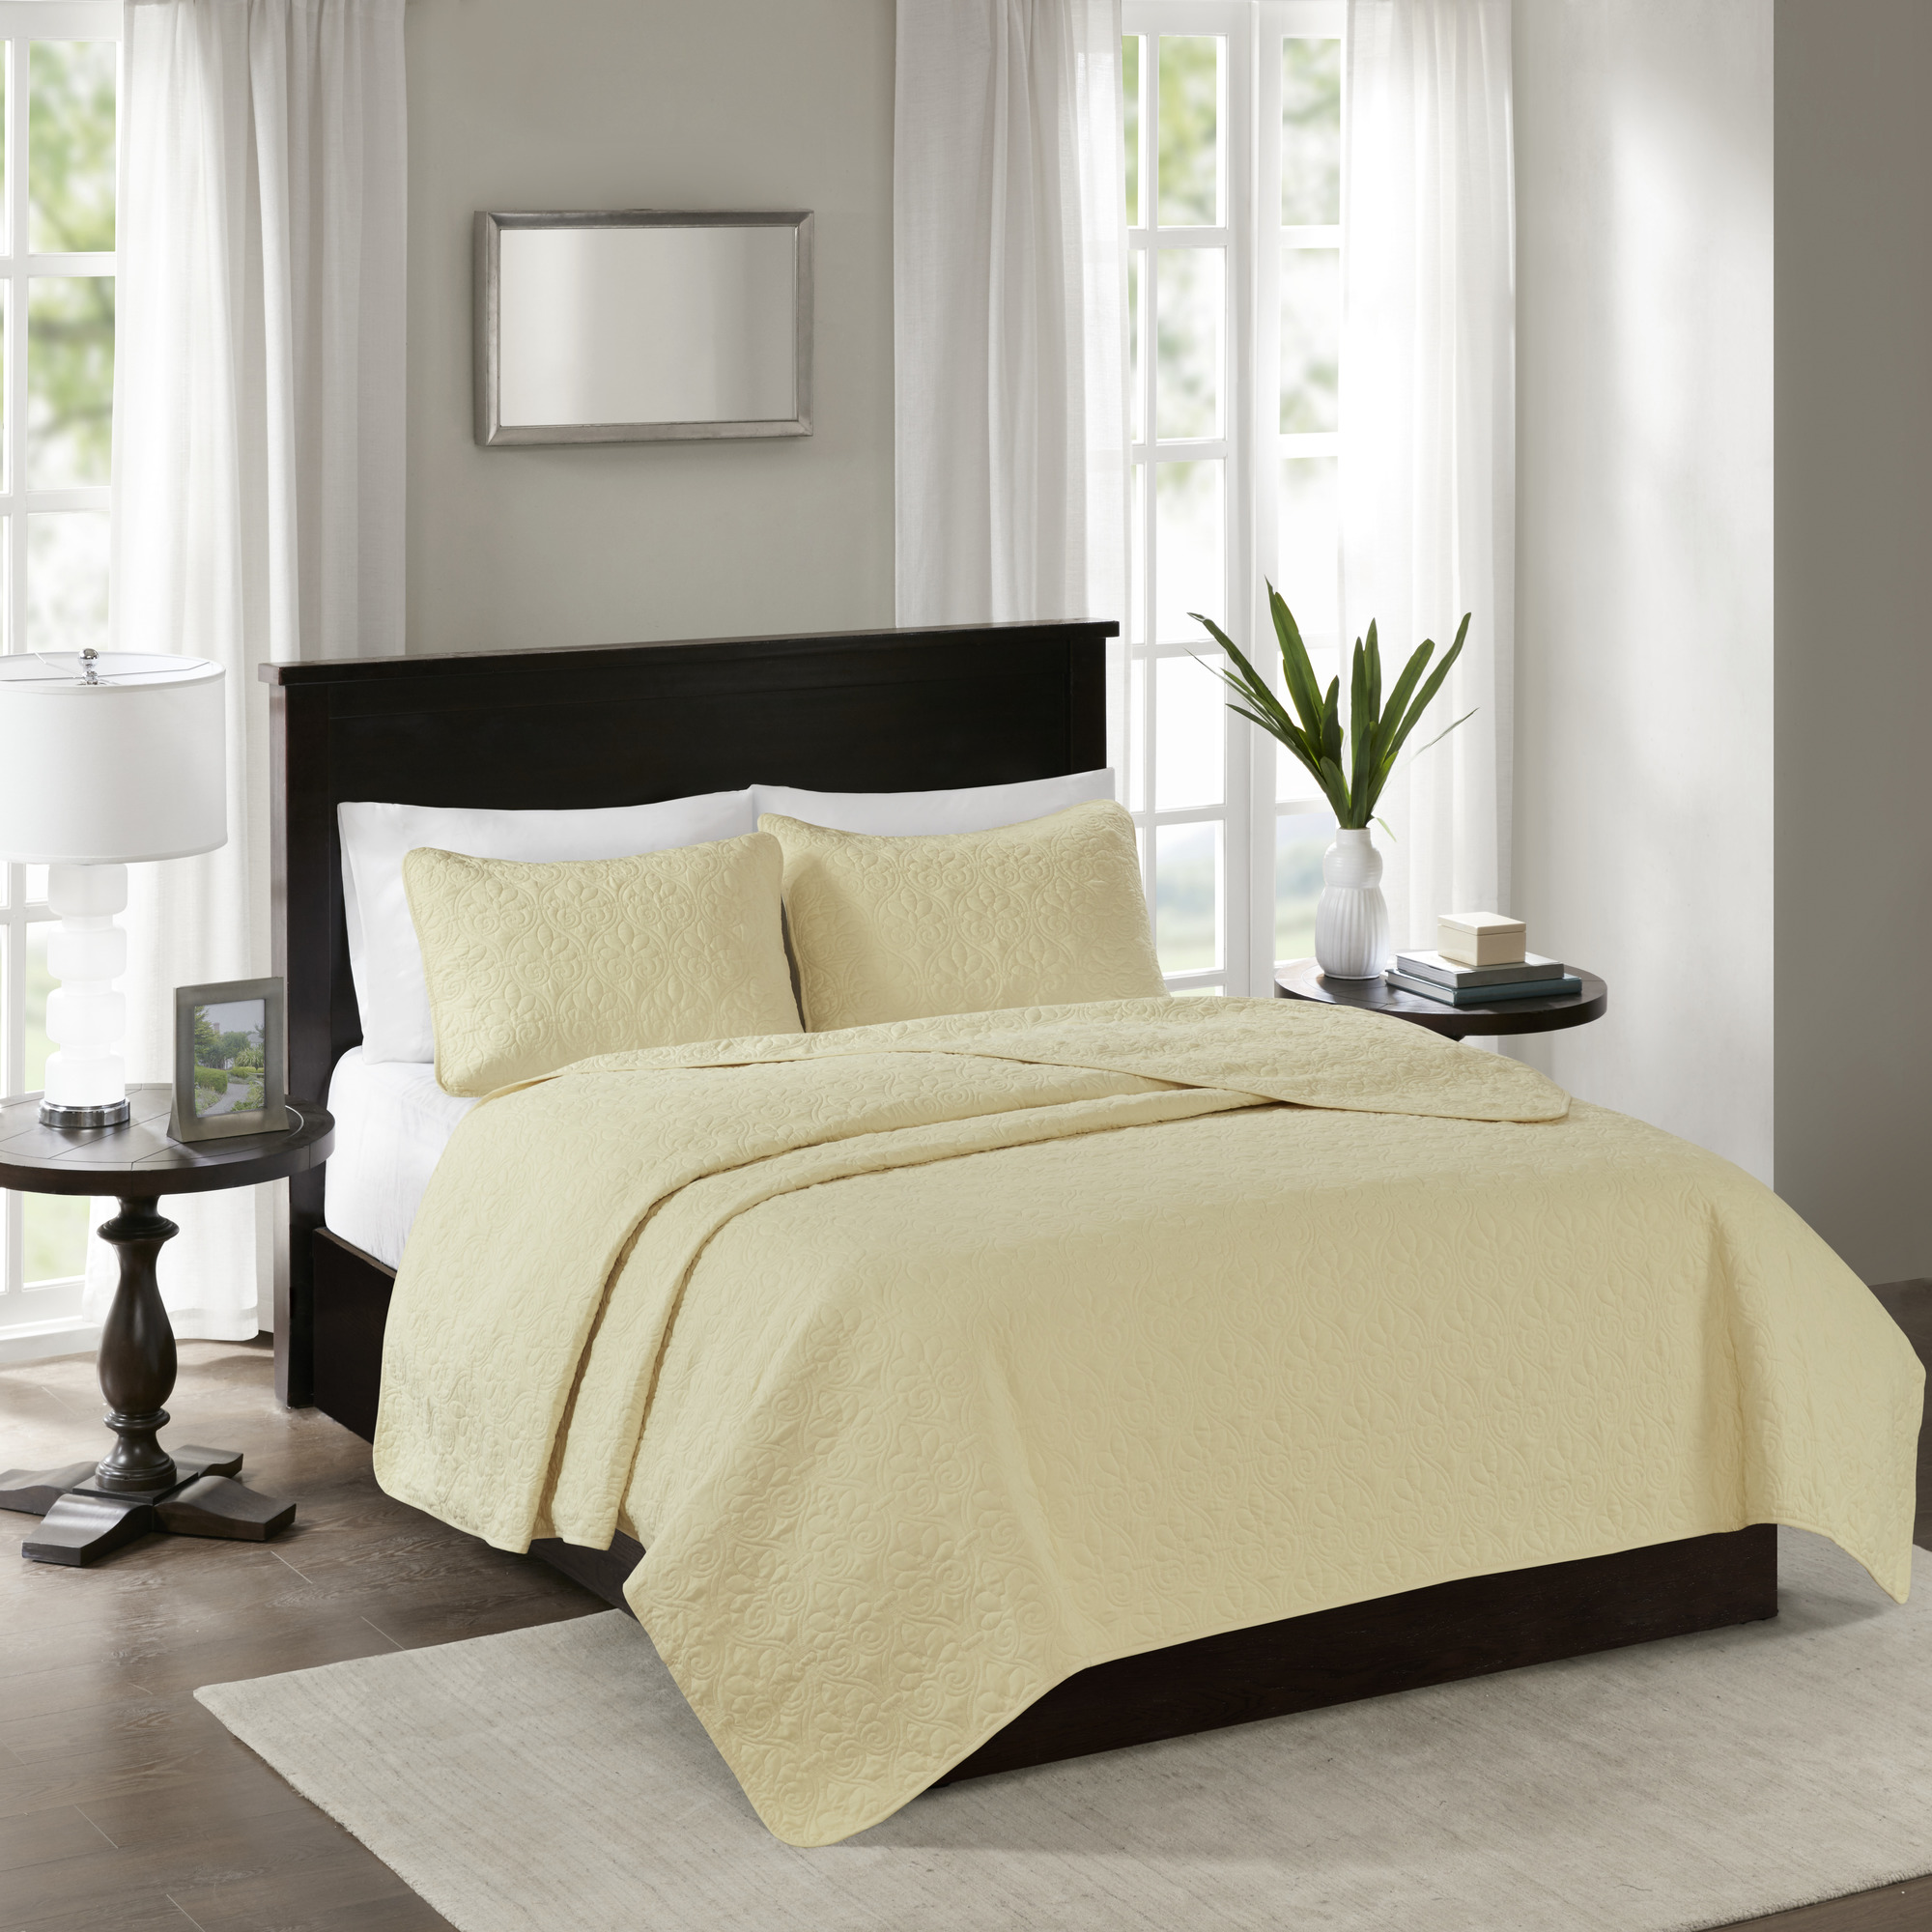 Home Essence Vancouver Super Soft Reversible Coverlet Set, Twin/Twin XL, Yellow - image 3 of 12